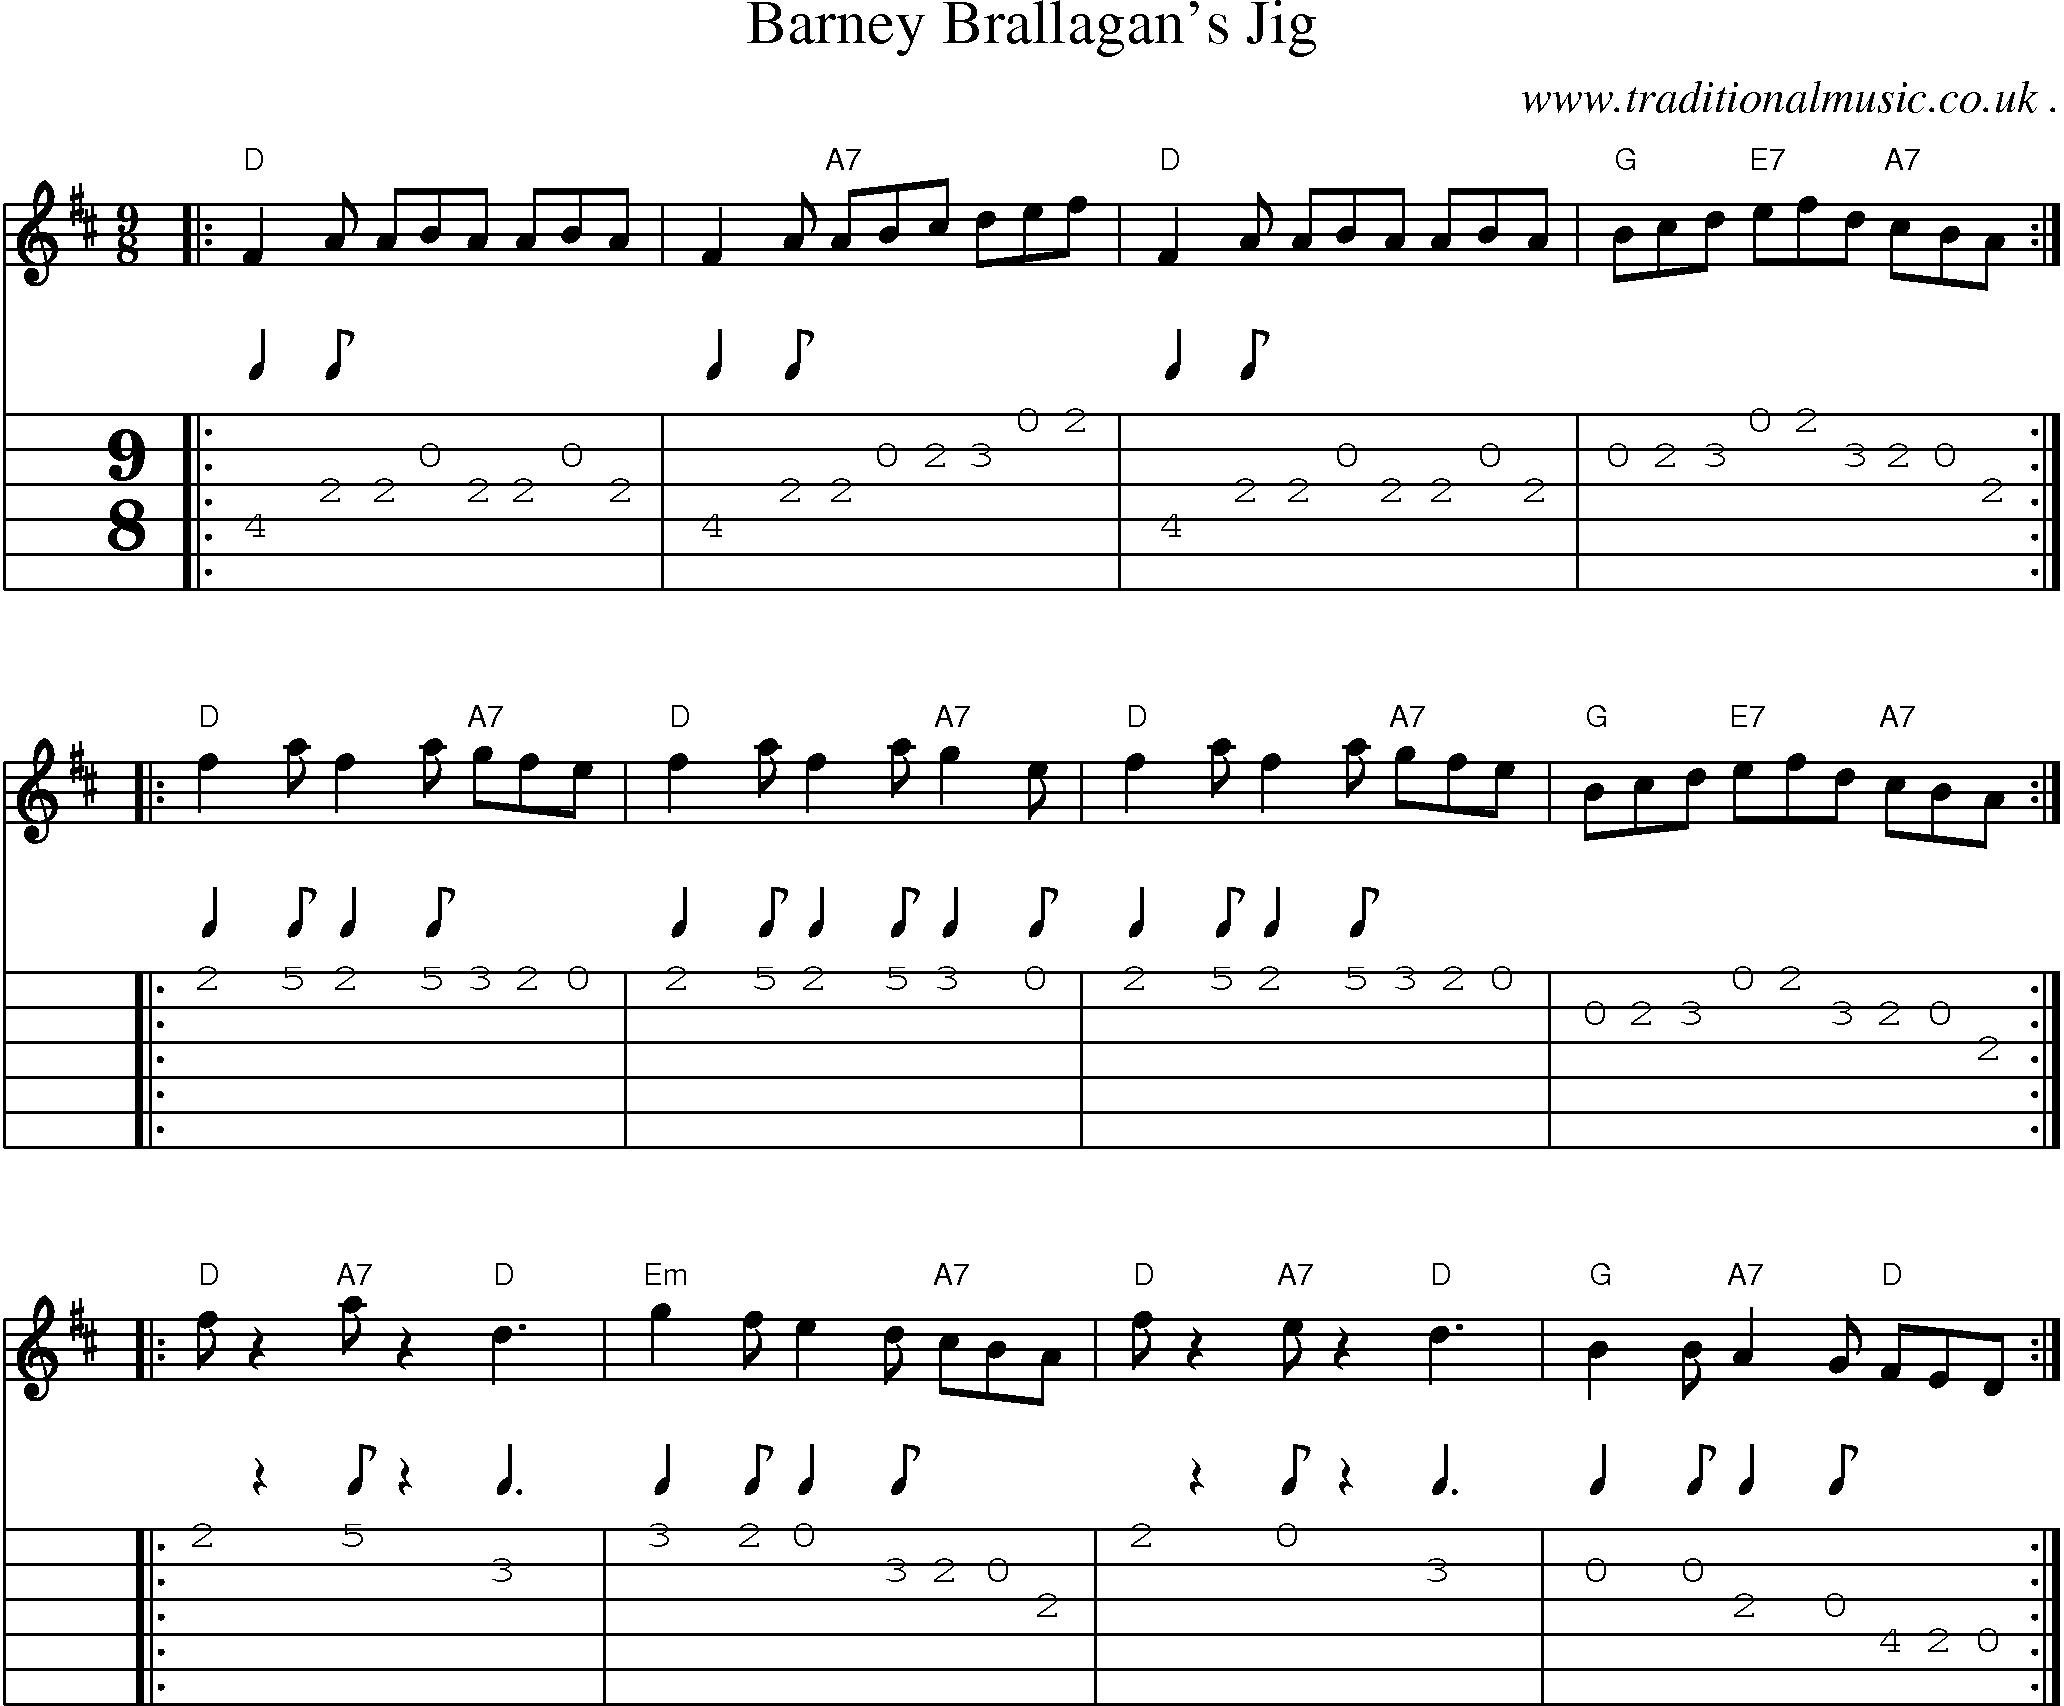 Sheet-music  score, Chords and Guitar Tabs for Barney Brallagans Jig